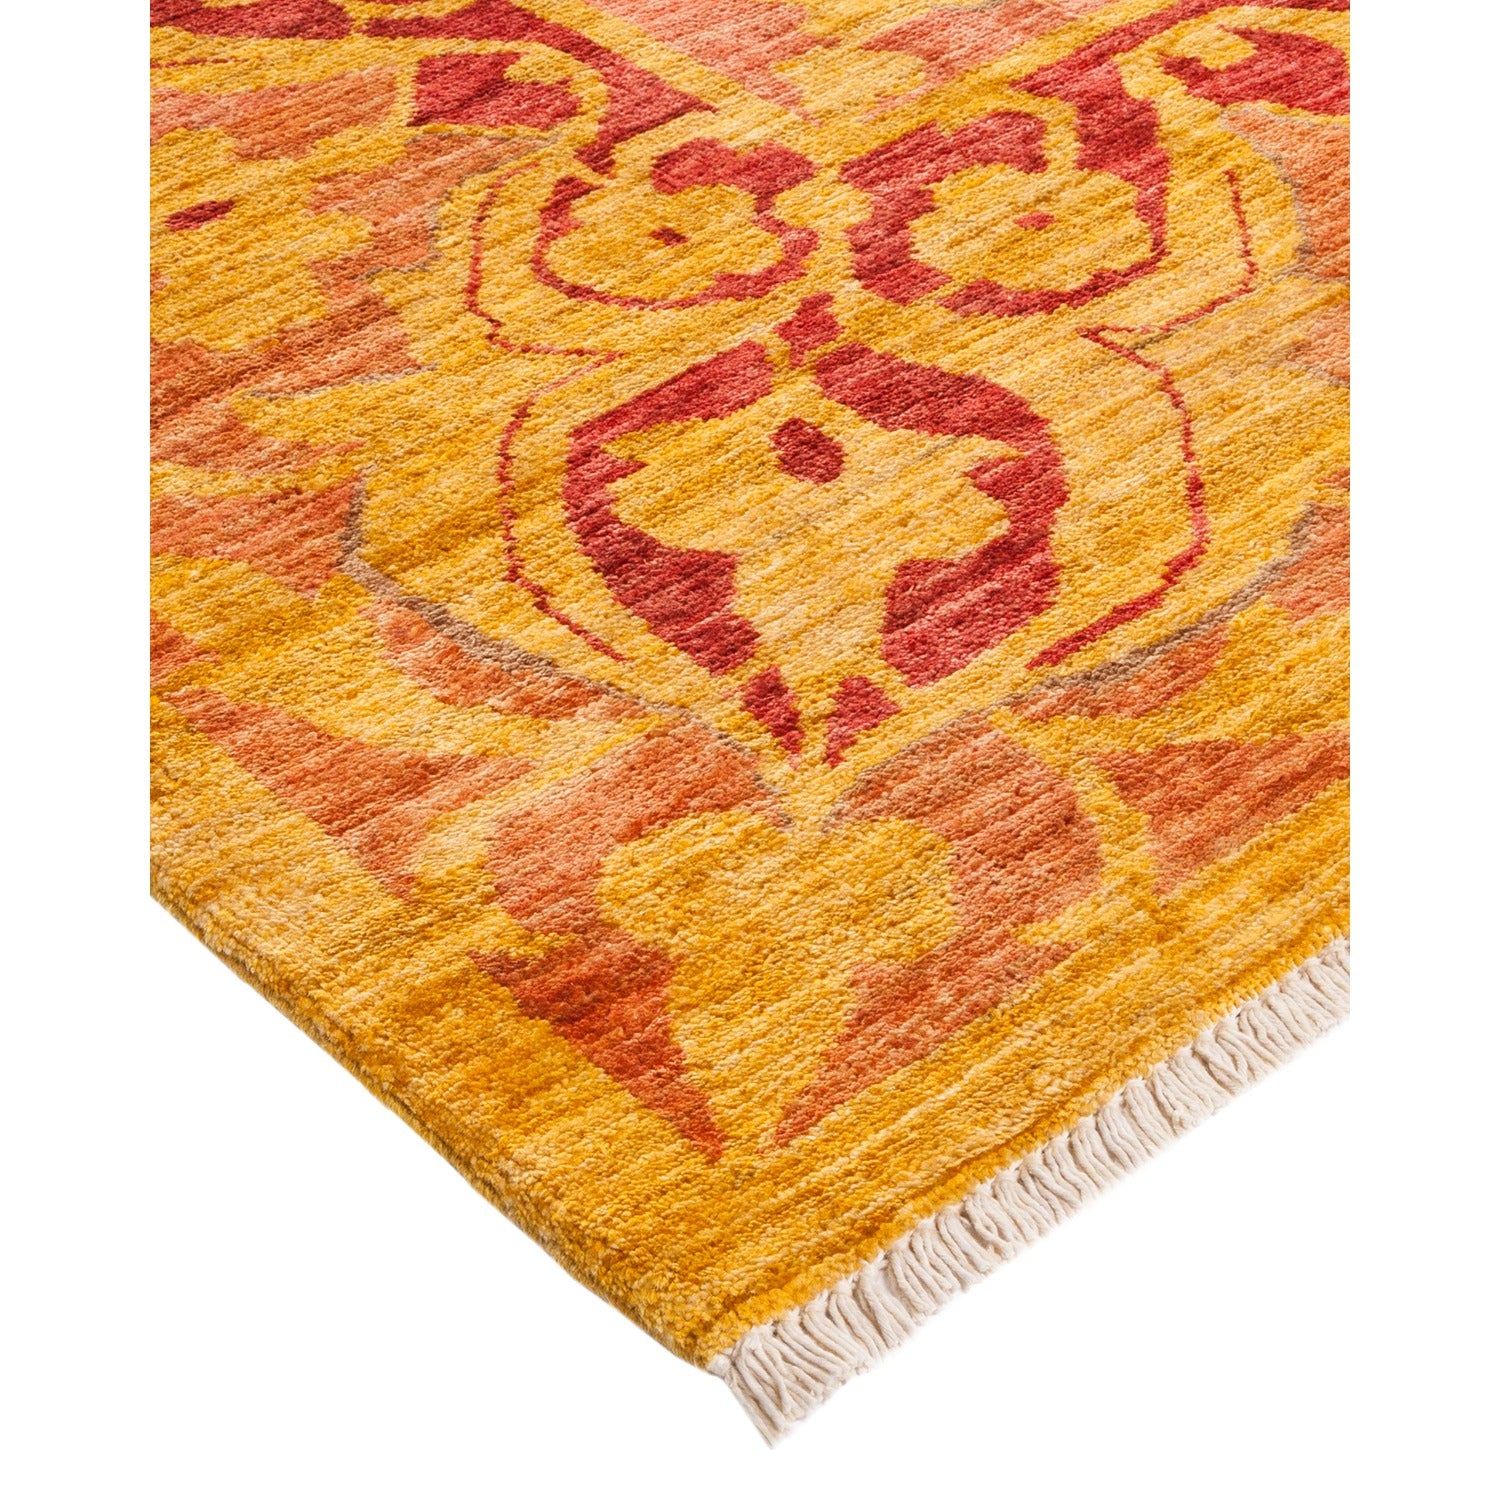 Vibrant handwoven rug with intricate symmetrical design and plush texture.